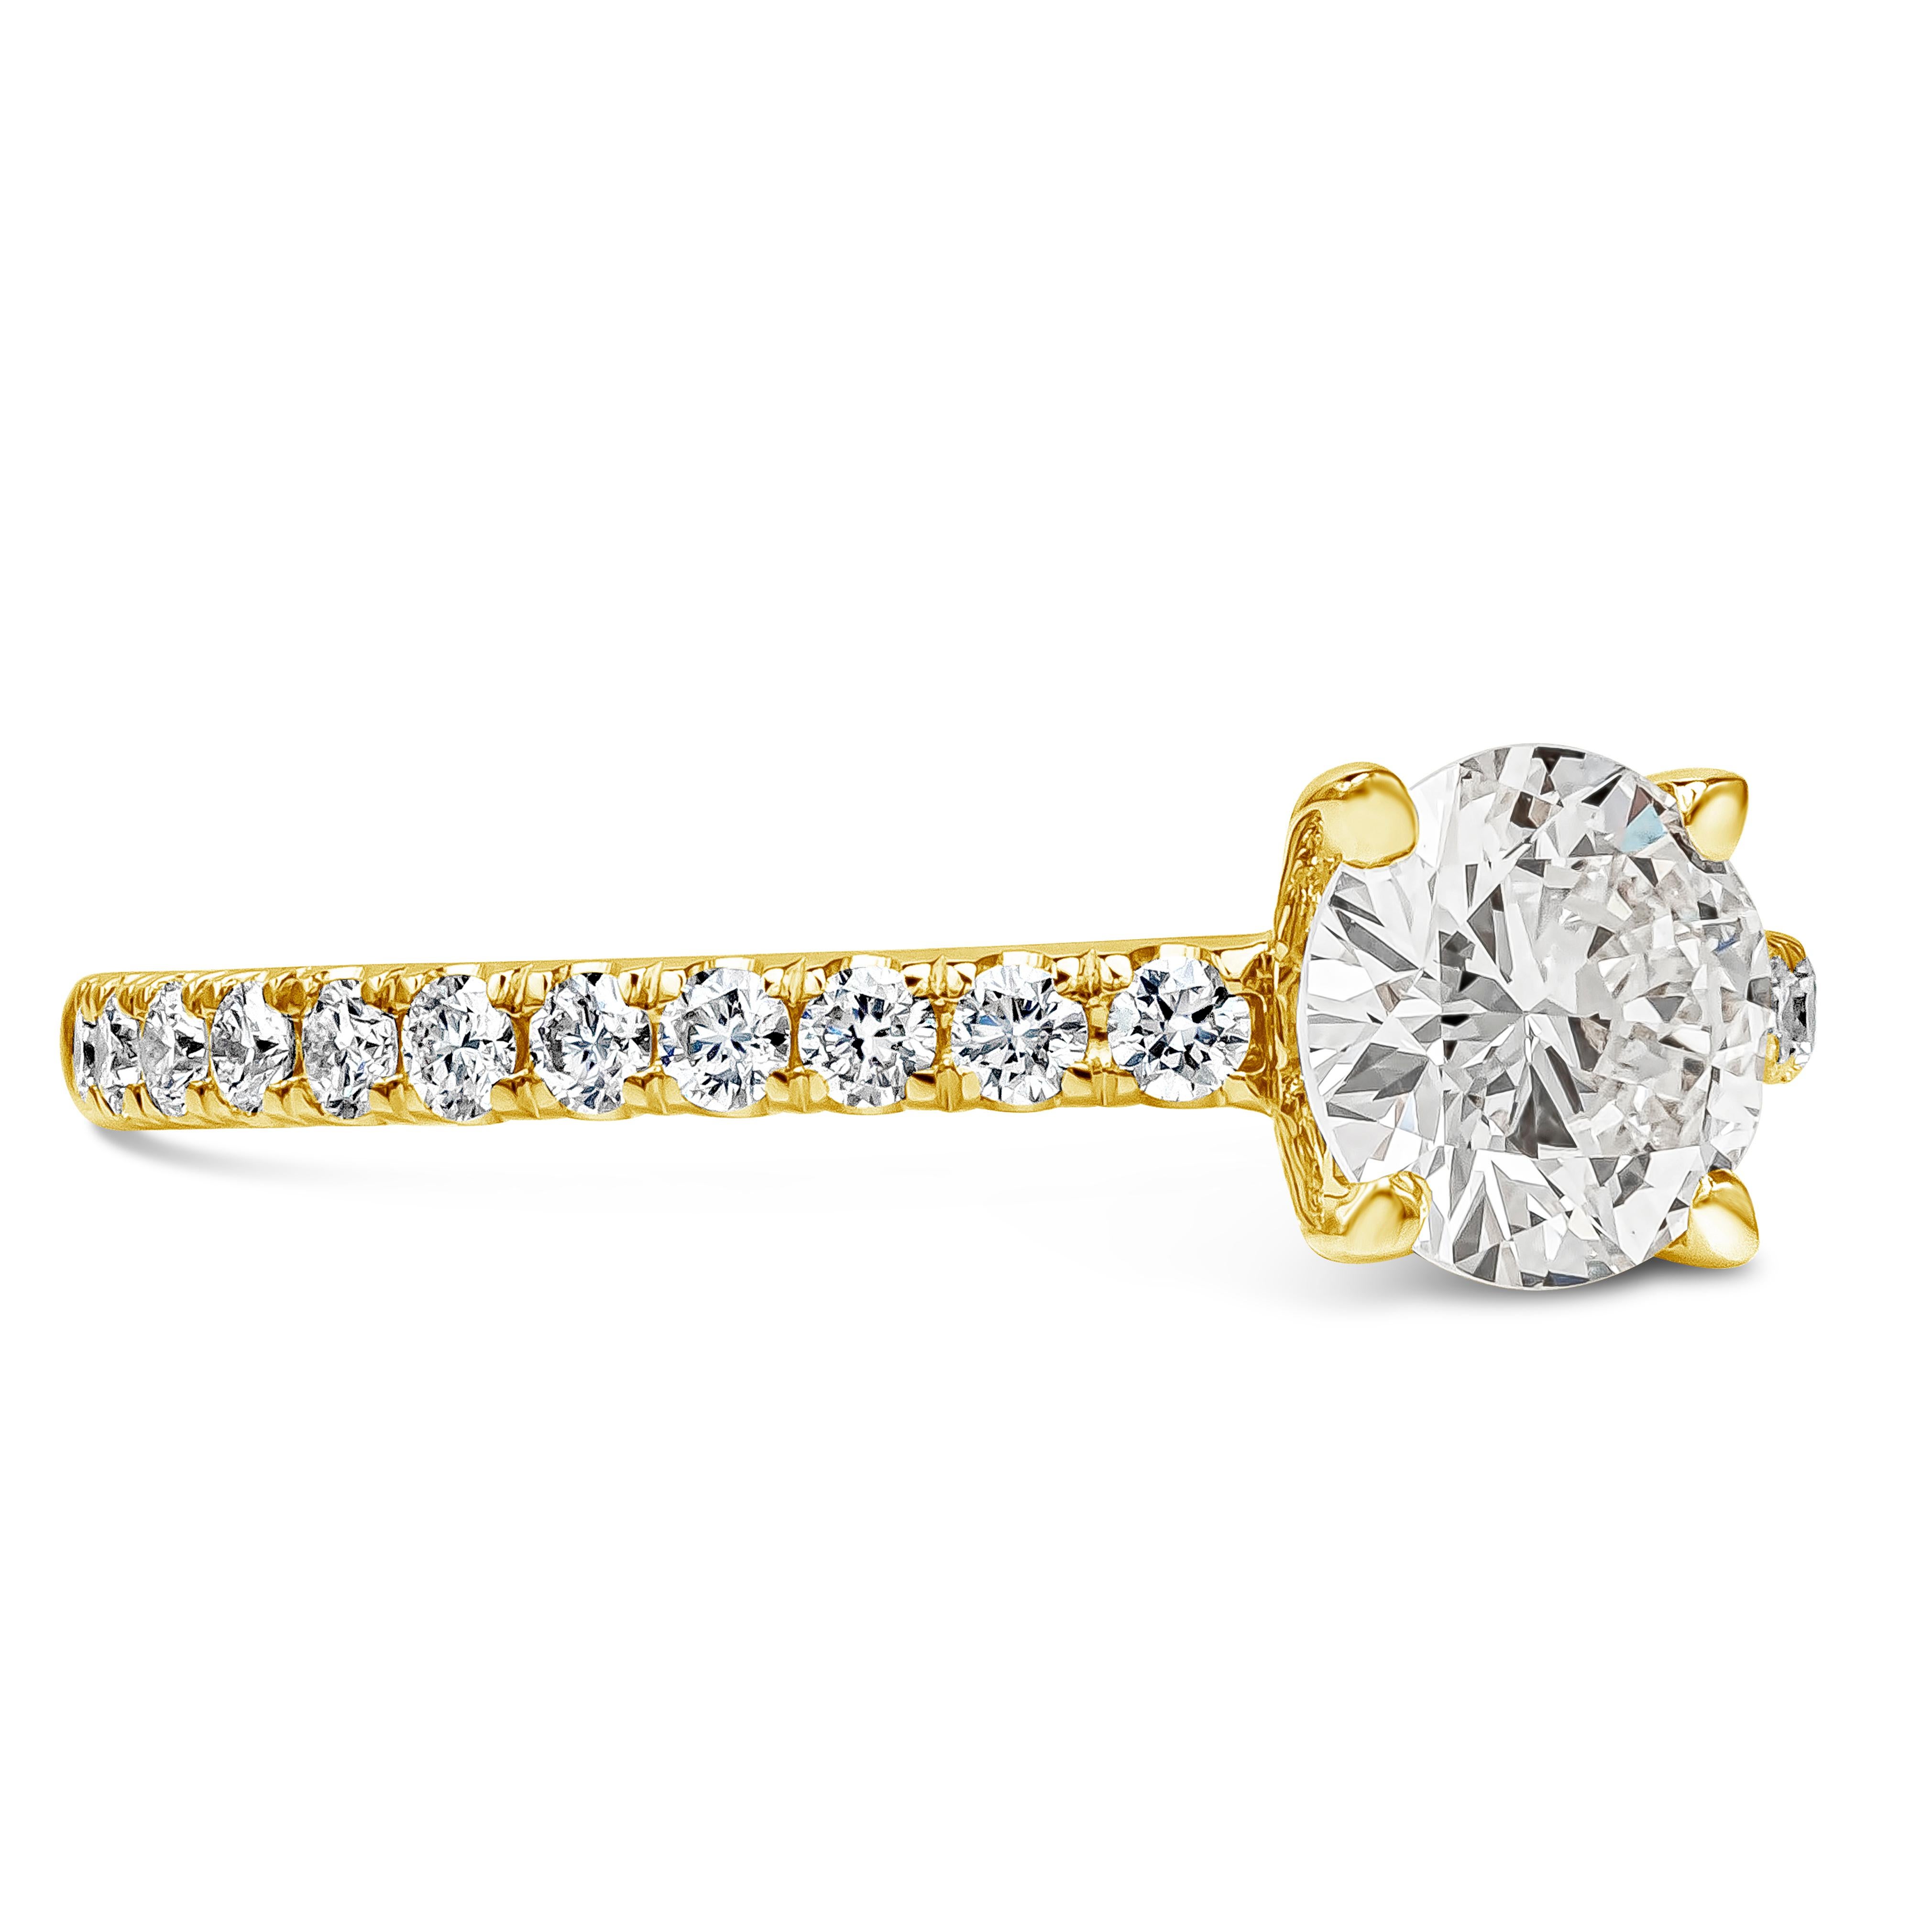 A classic engagement ring style showcasing a 0.73 carats round brilliant diamond certified by GIA as I color, VS1 in clarity. Center diamond is set in a polished 18k yellow gold setting accented with round diamonds weighing 0.35 carats total. Size